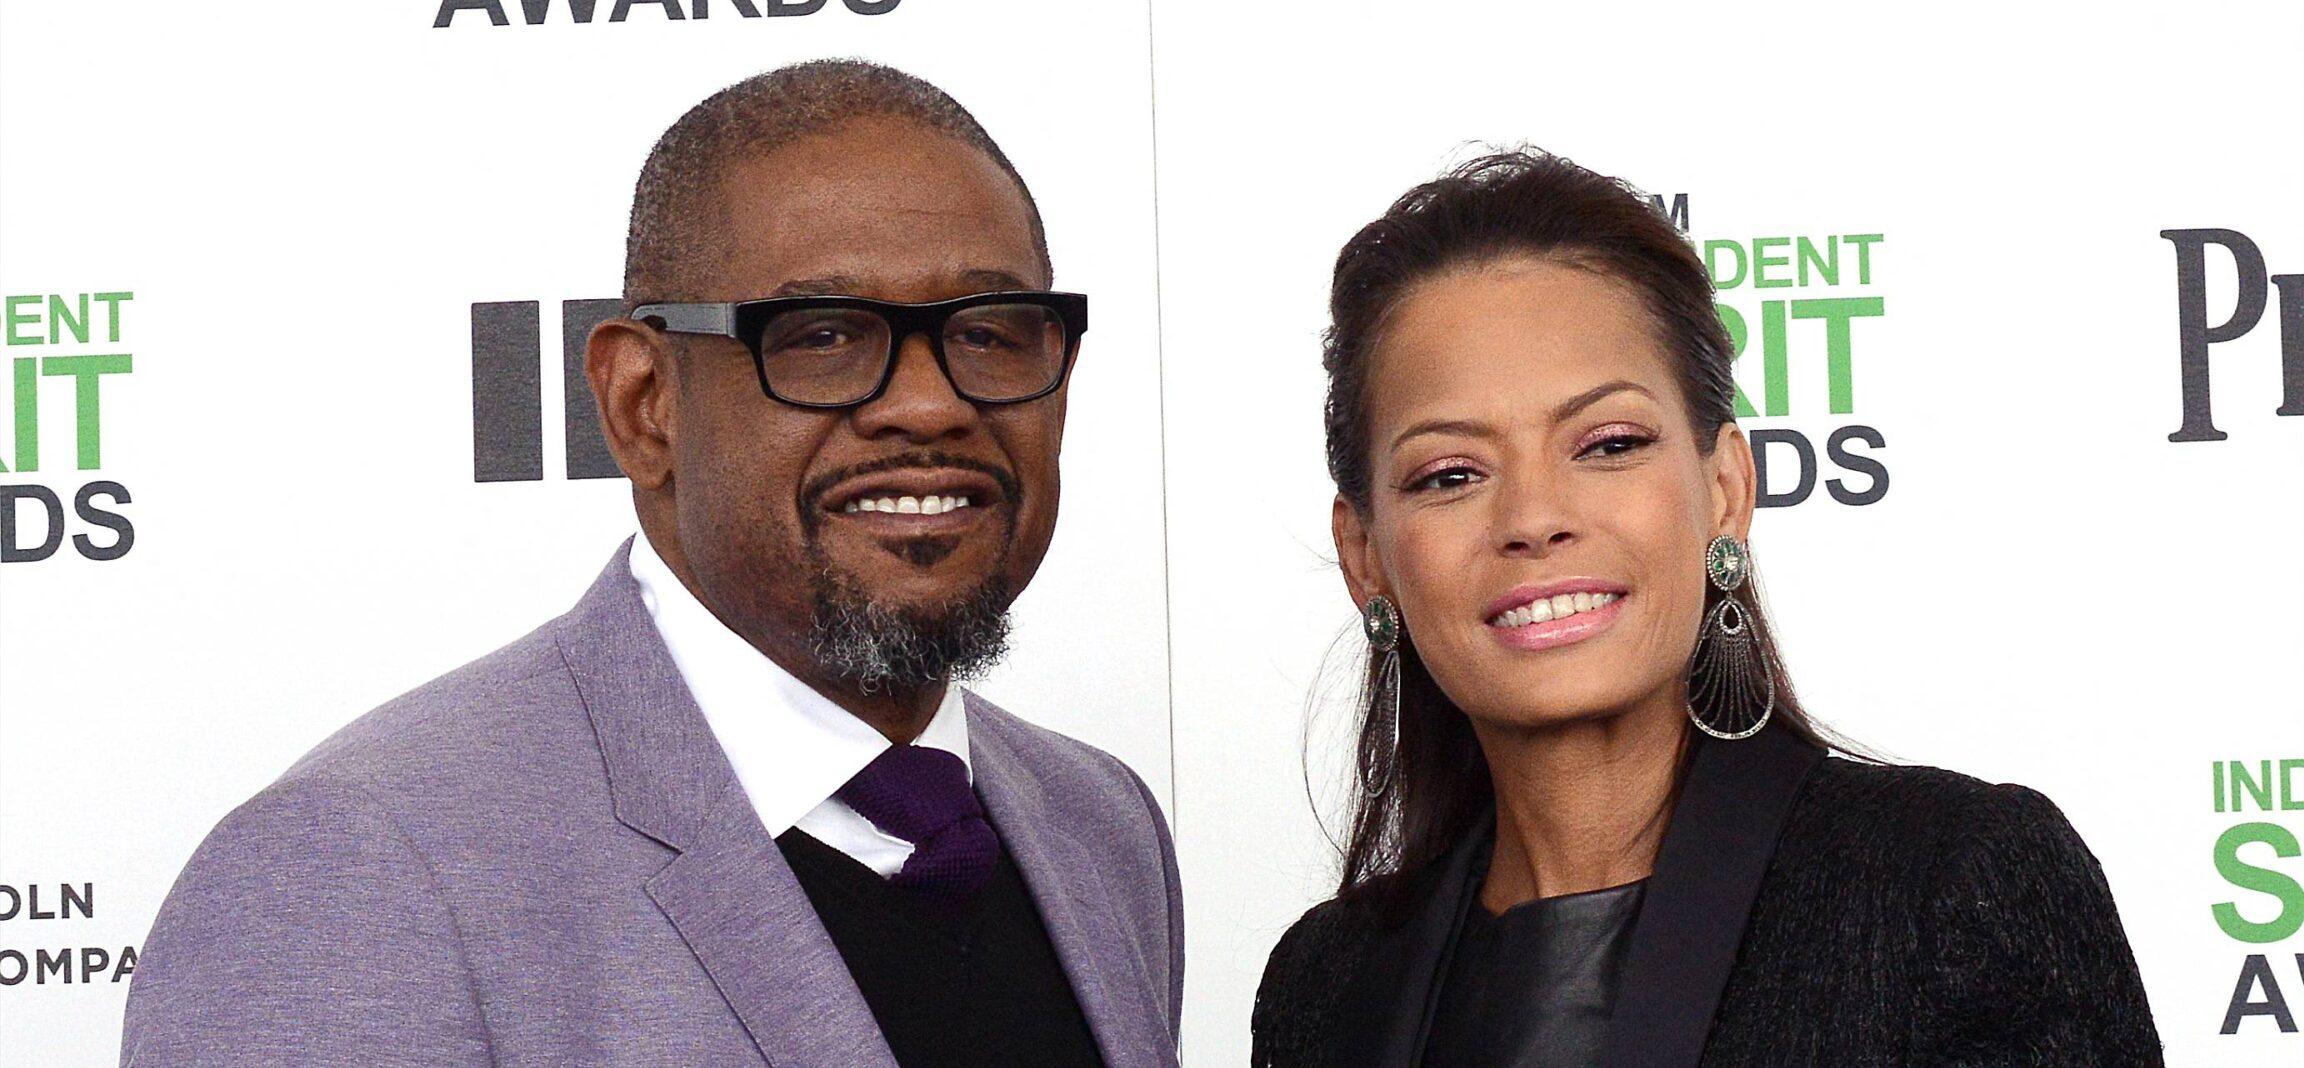 Forest Whitaker Ex Wife Passes scaled e1704233801549